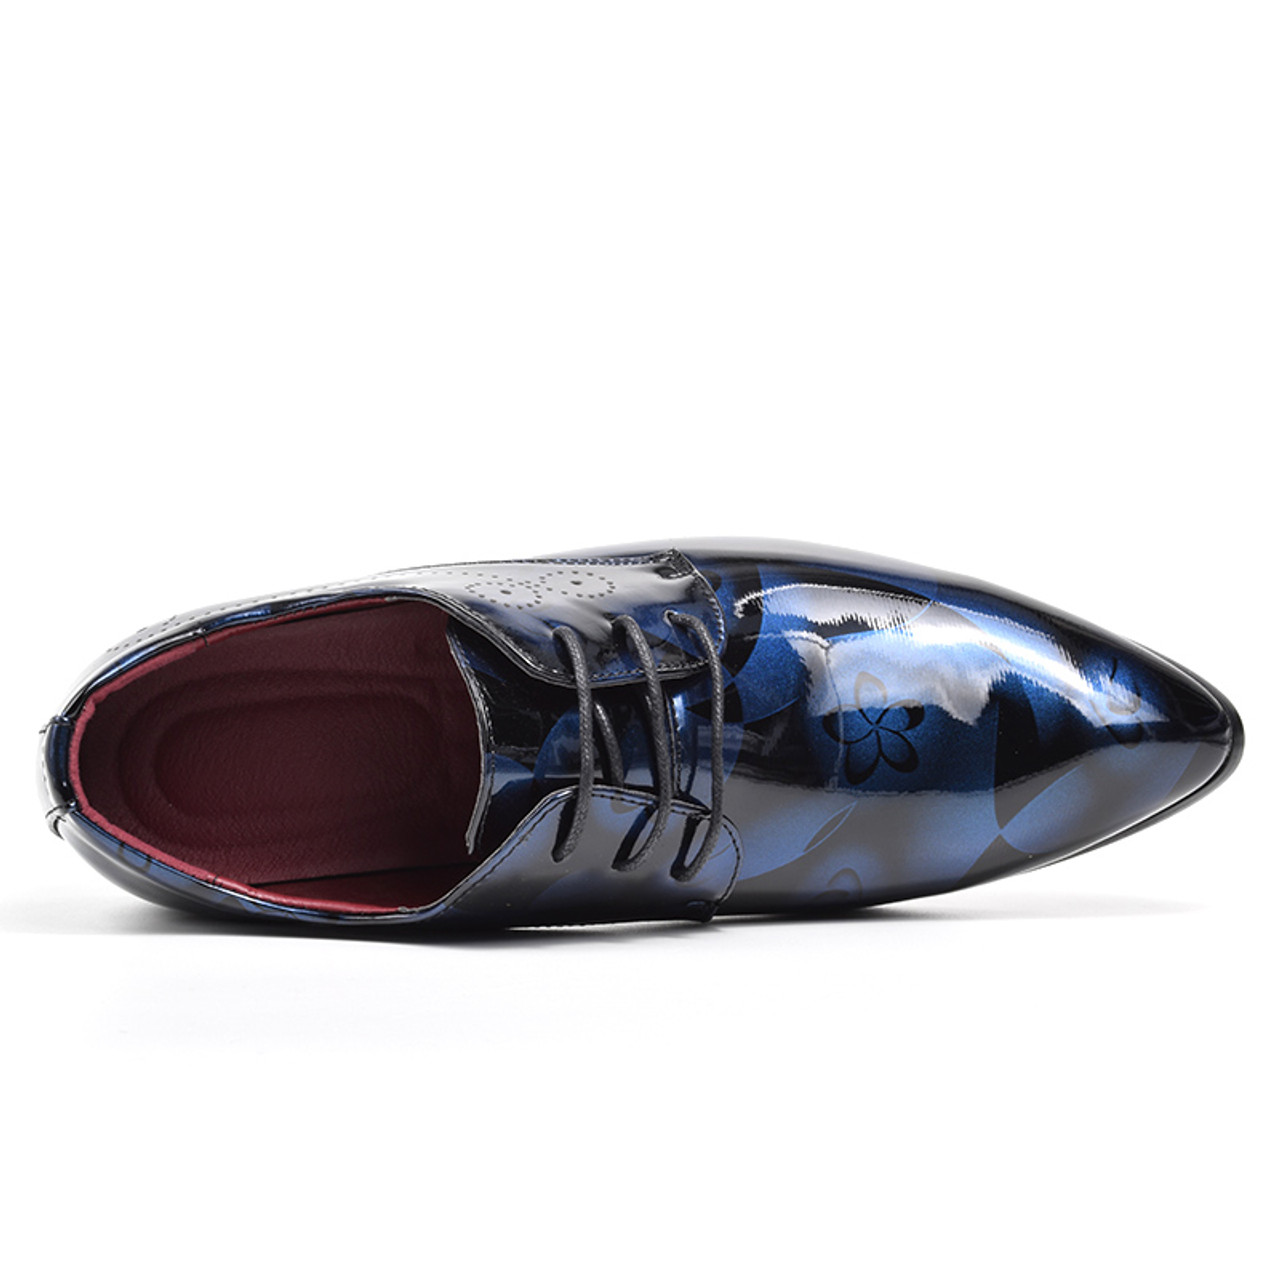 mens formal patent leather shoes